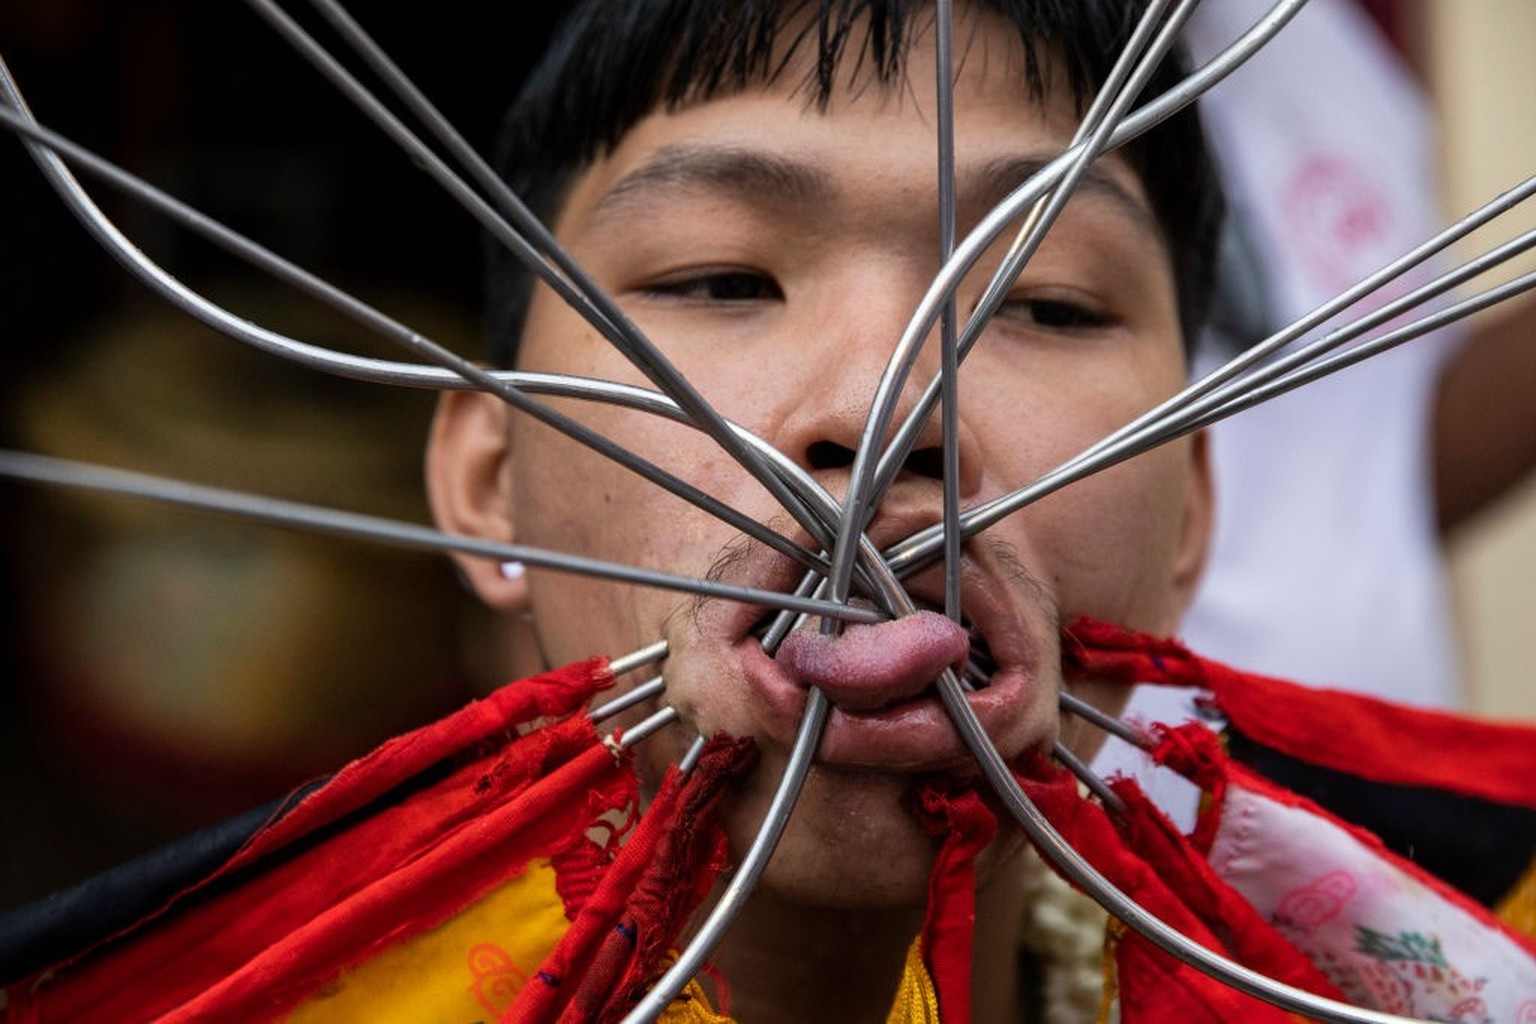 PHUKET, THAILAND - OCTOBER 01: (EDITORS NOTE: Image contains graphic content) Thai devotees pierced with long needles during a ritual at the Bang Neow Shrine on October 1, 2022 in Phuket, Thailand. Th ...